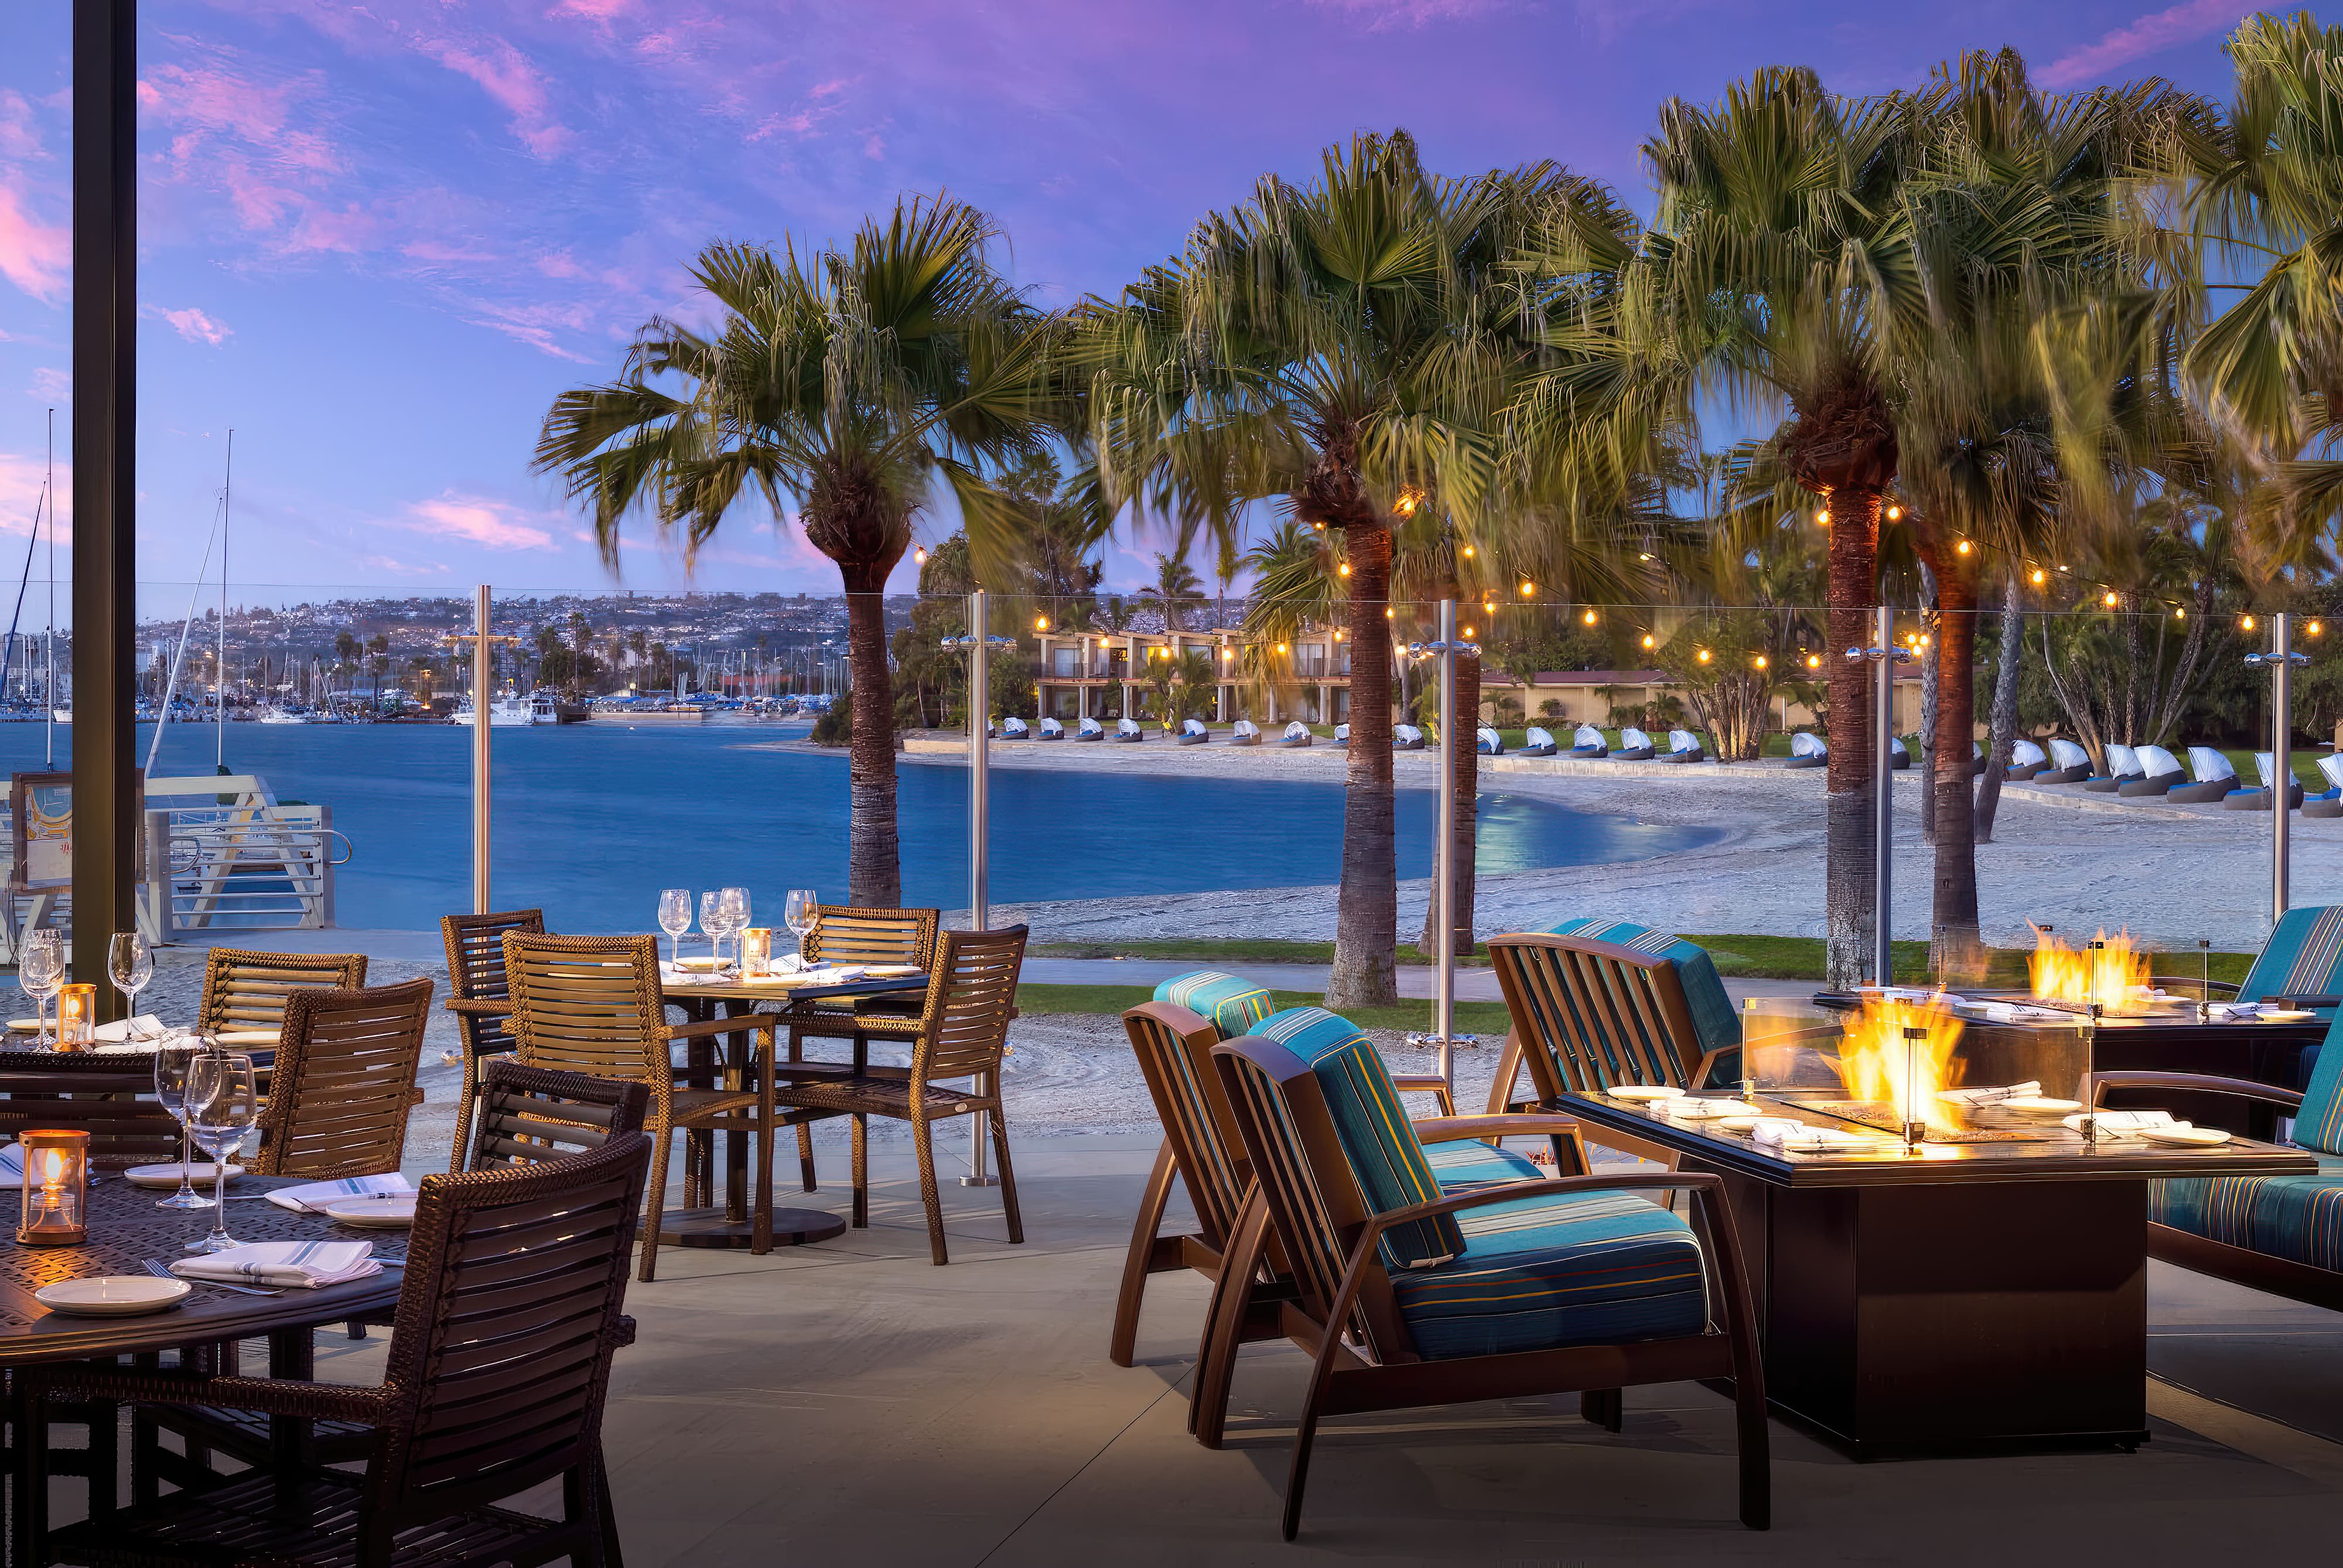 A view of the beach from Dockside 1953, the waterfront restaurant in Mission Bay, San Diego at the Bahia Resort Hotel